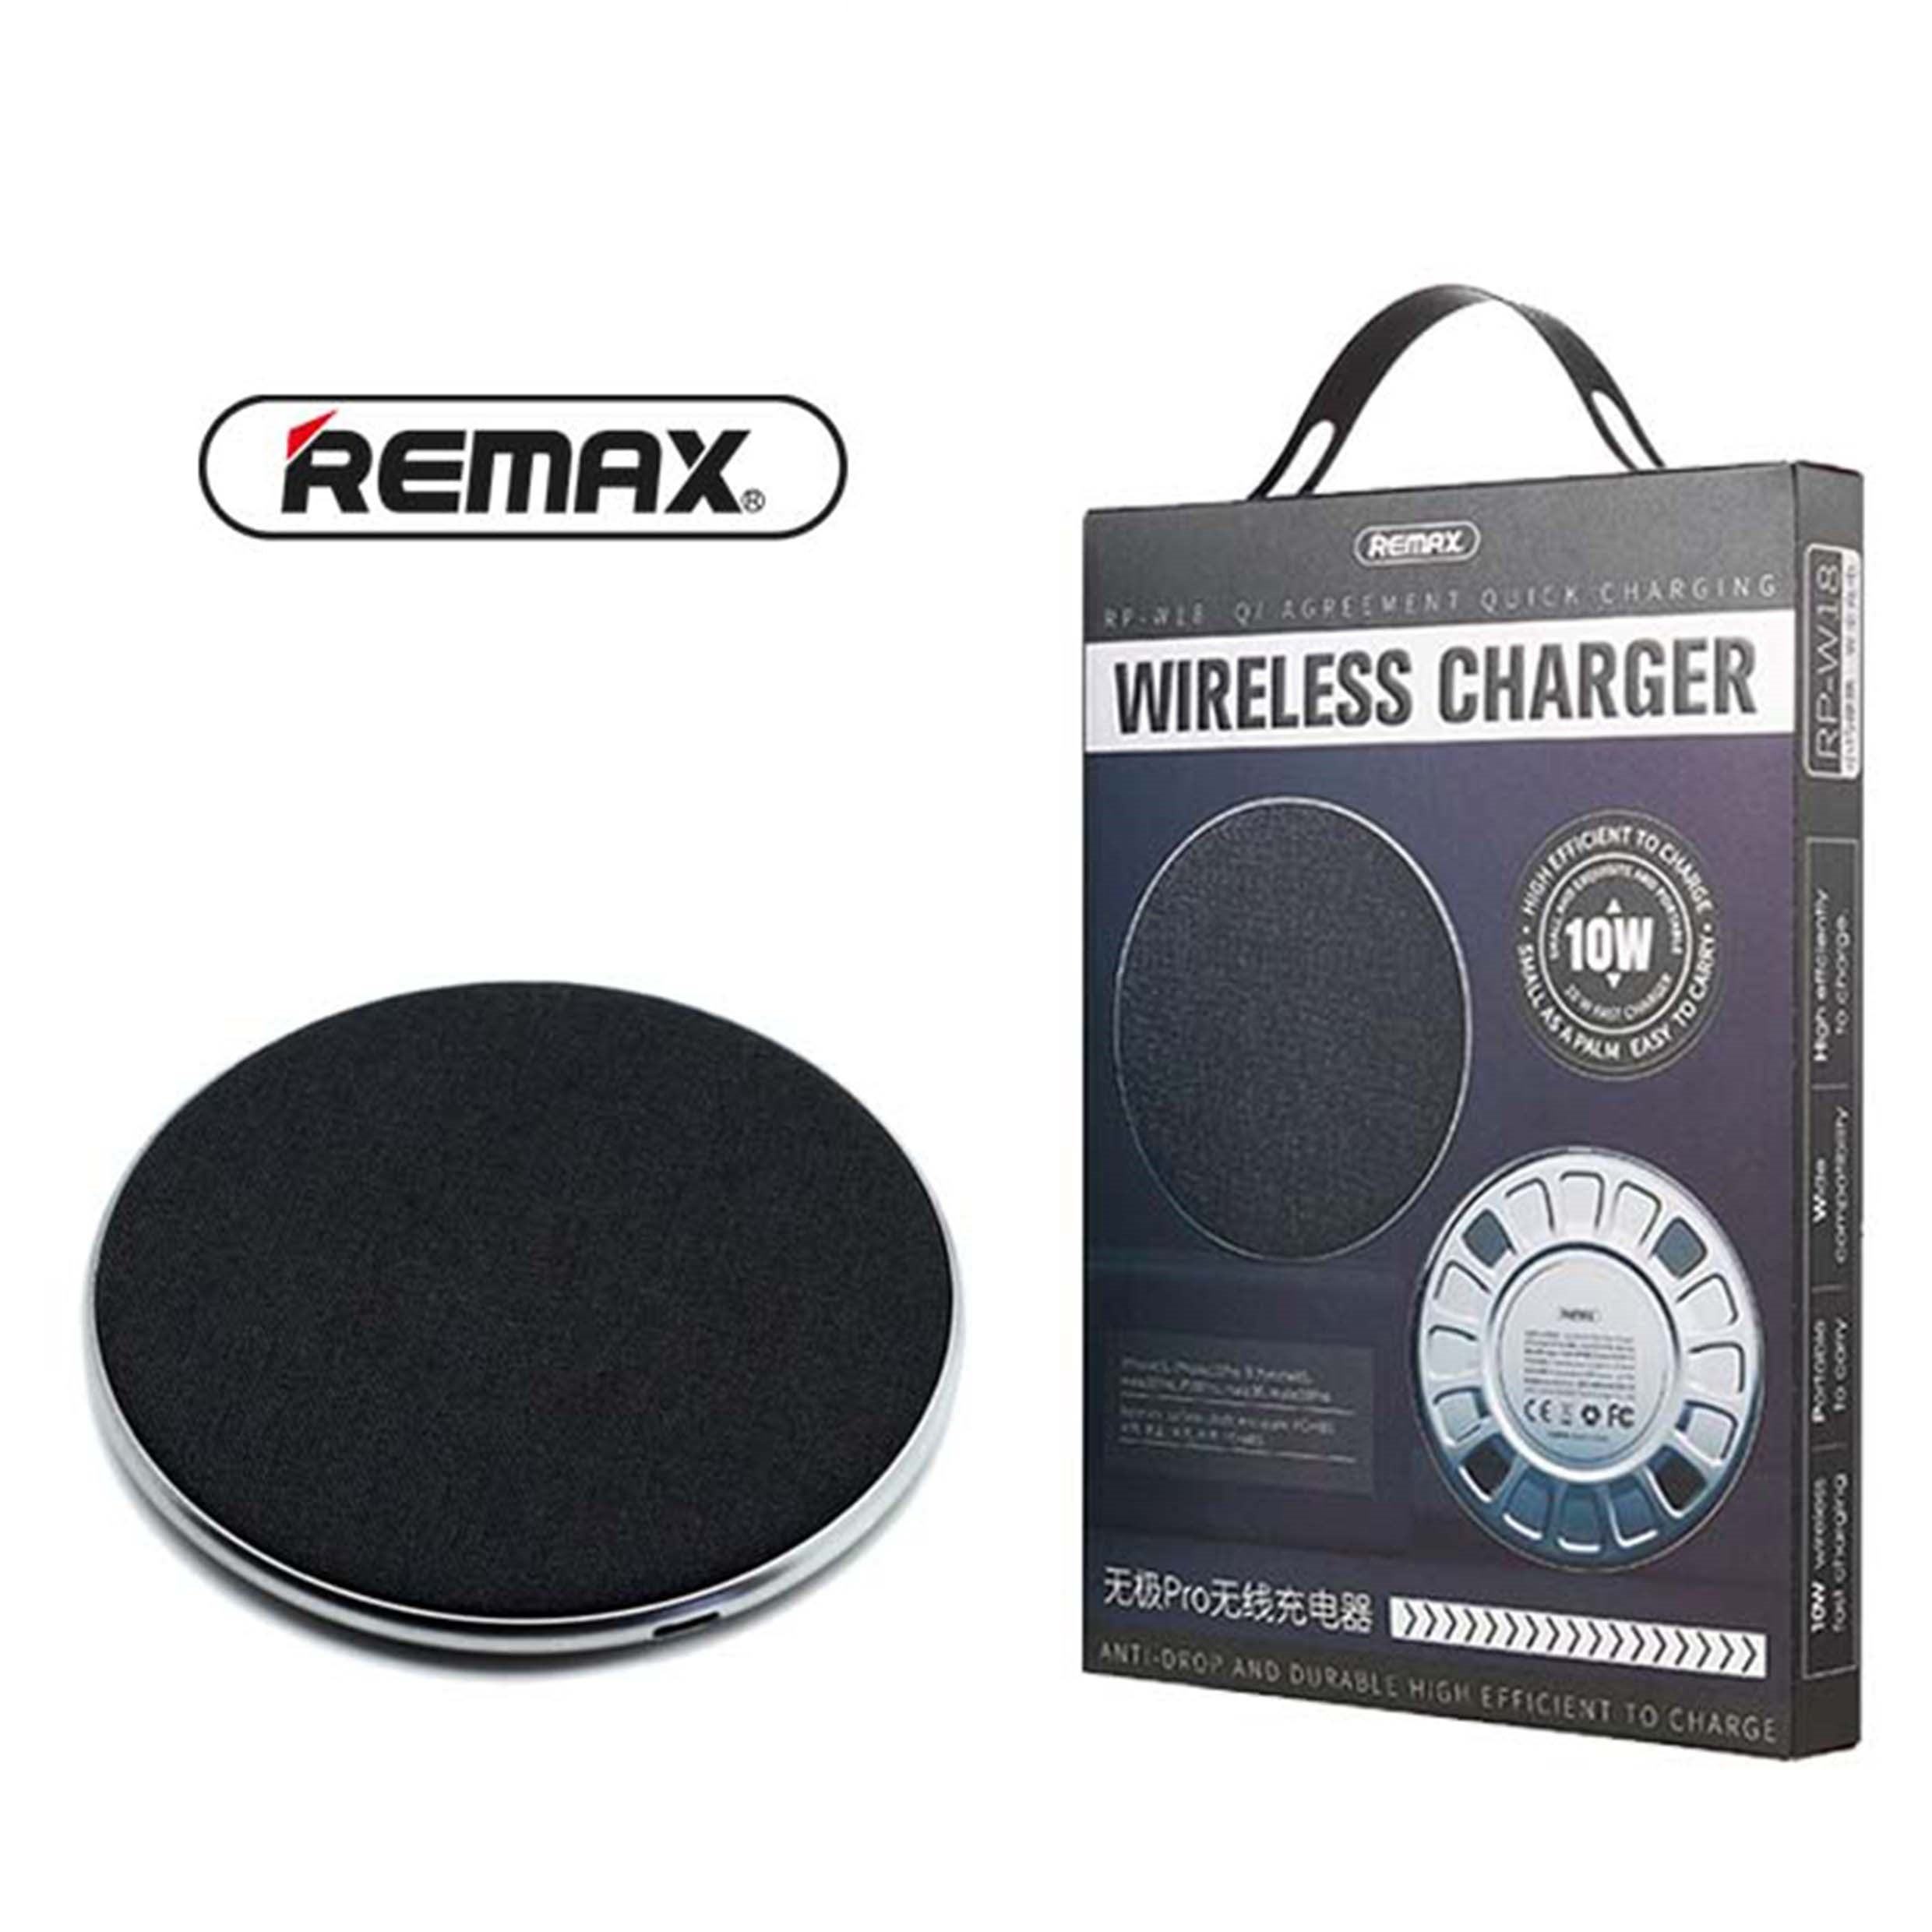 Refurbished Remax REMAX Wireless charger 10W By OzMobiles Australia